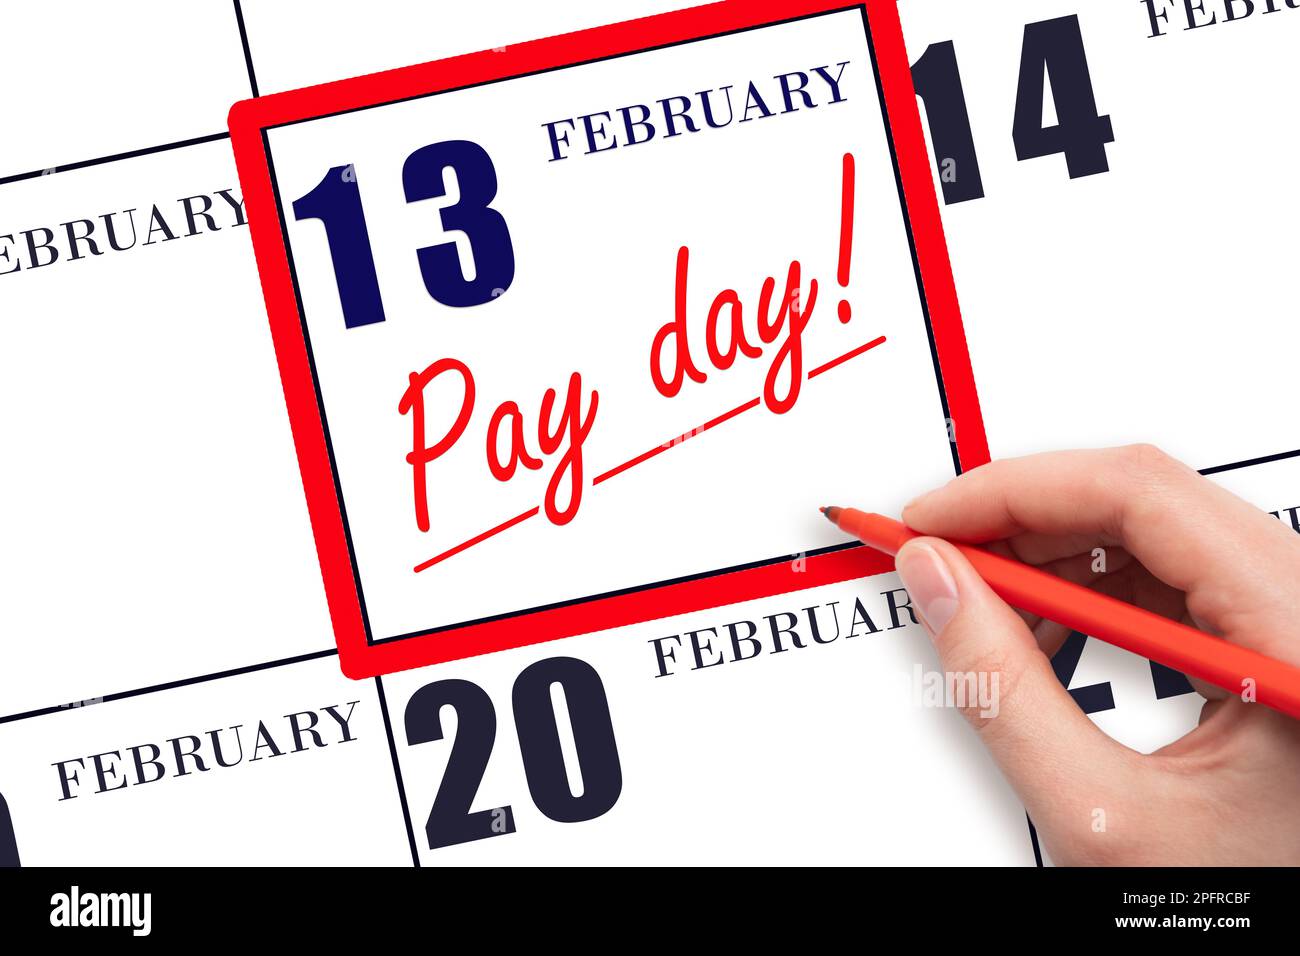 13th day of February. Hand writing text PAY DATE on calendar date February 13 and underline it. Payment due date.  Reminder concept of payment. Winter Stock Photo